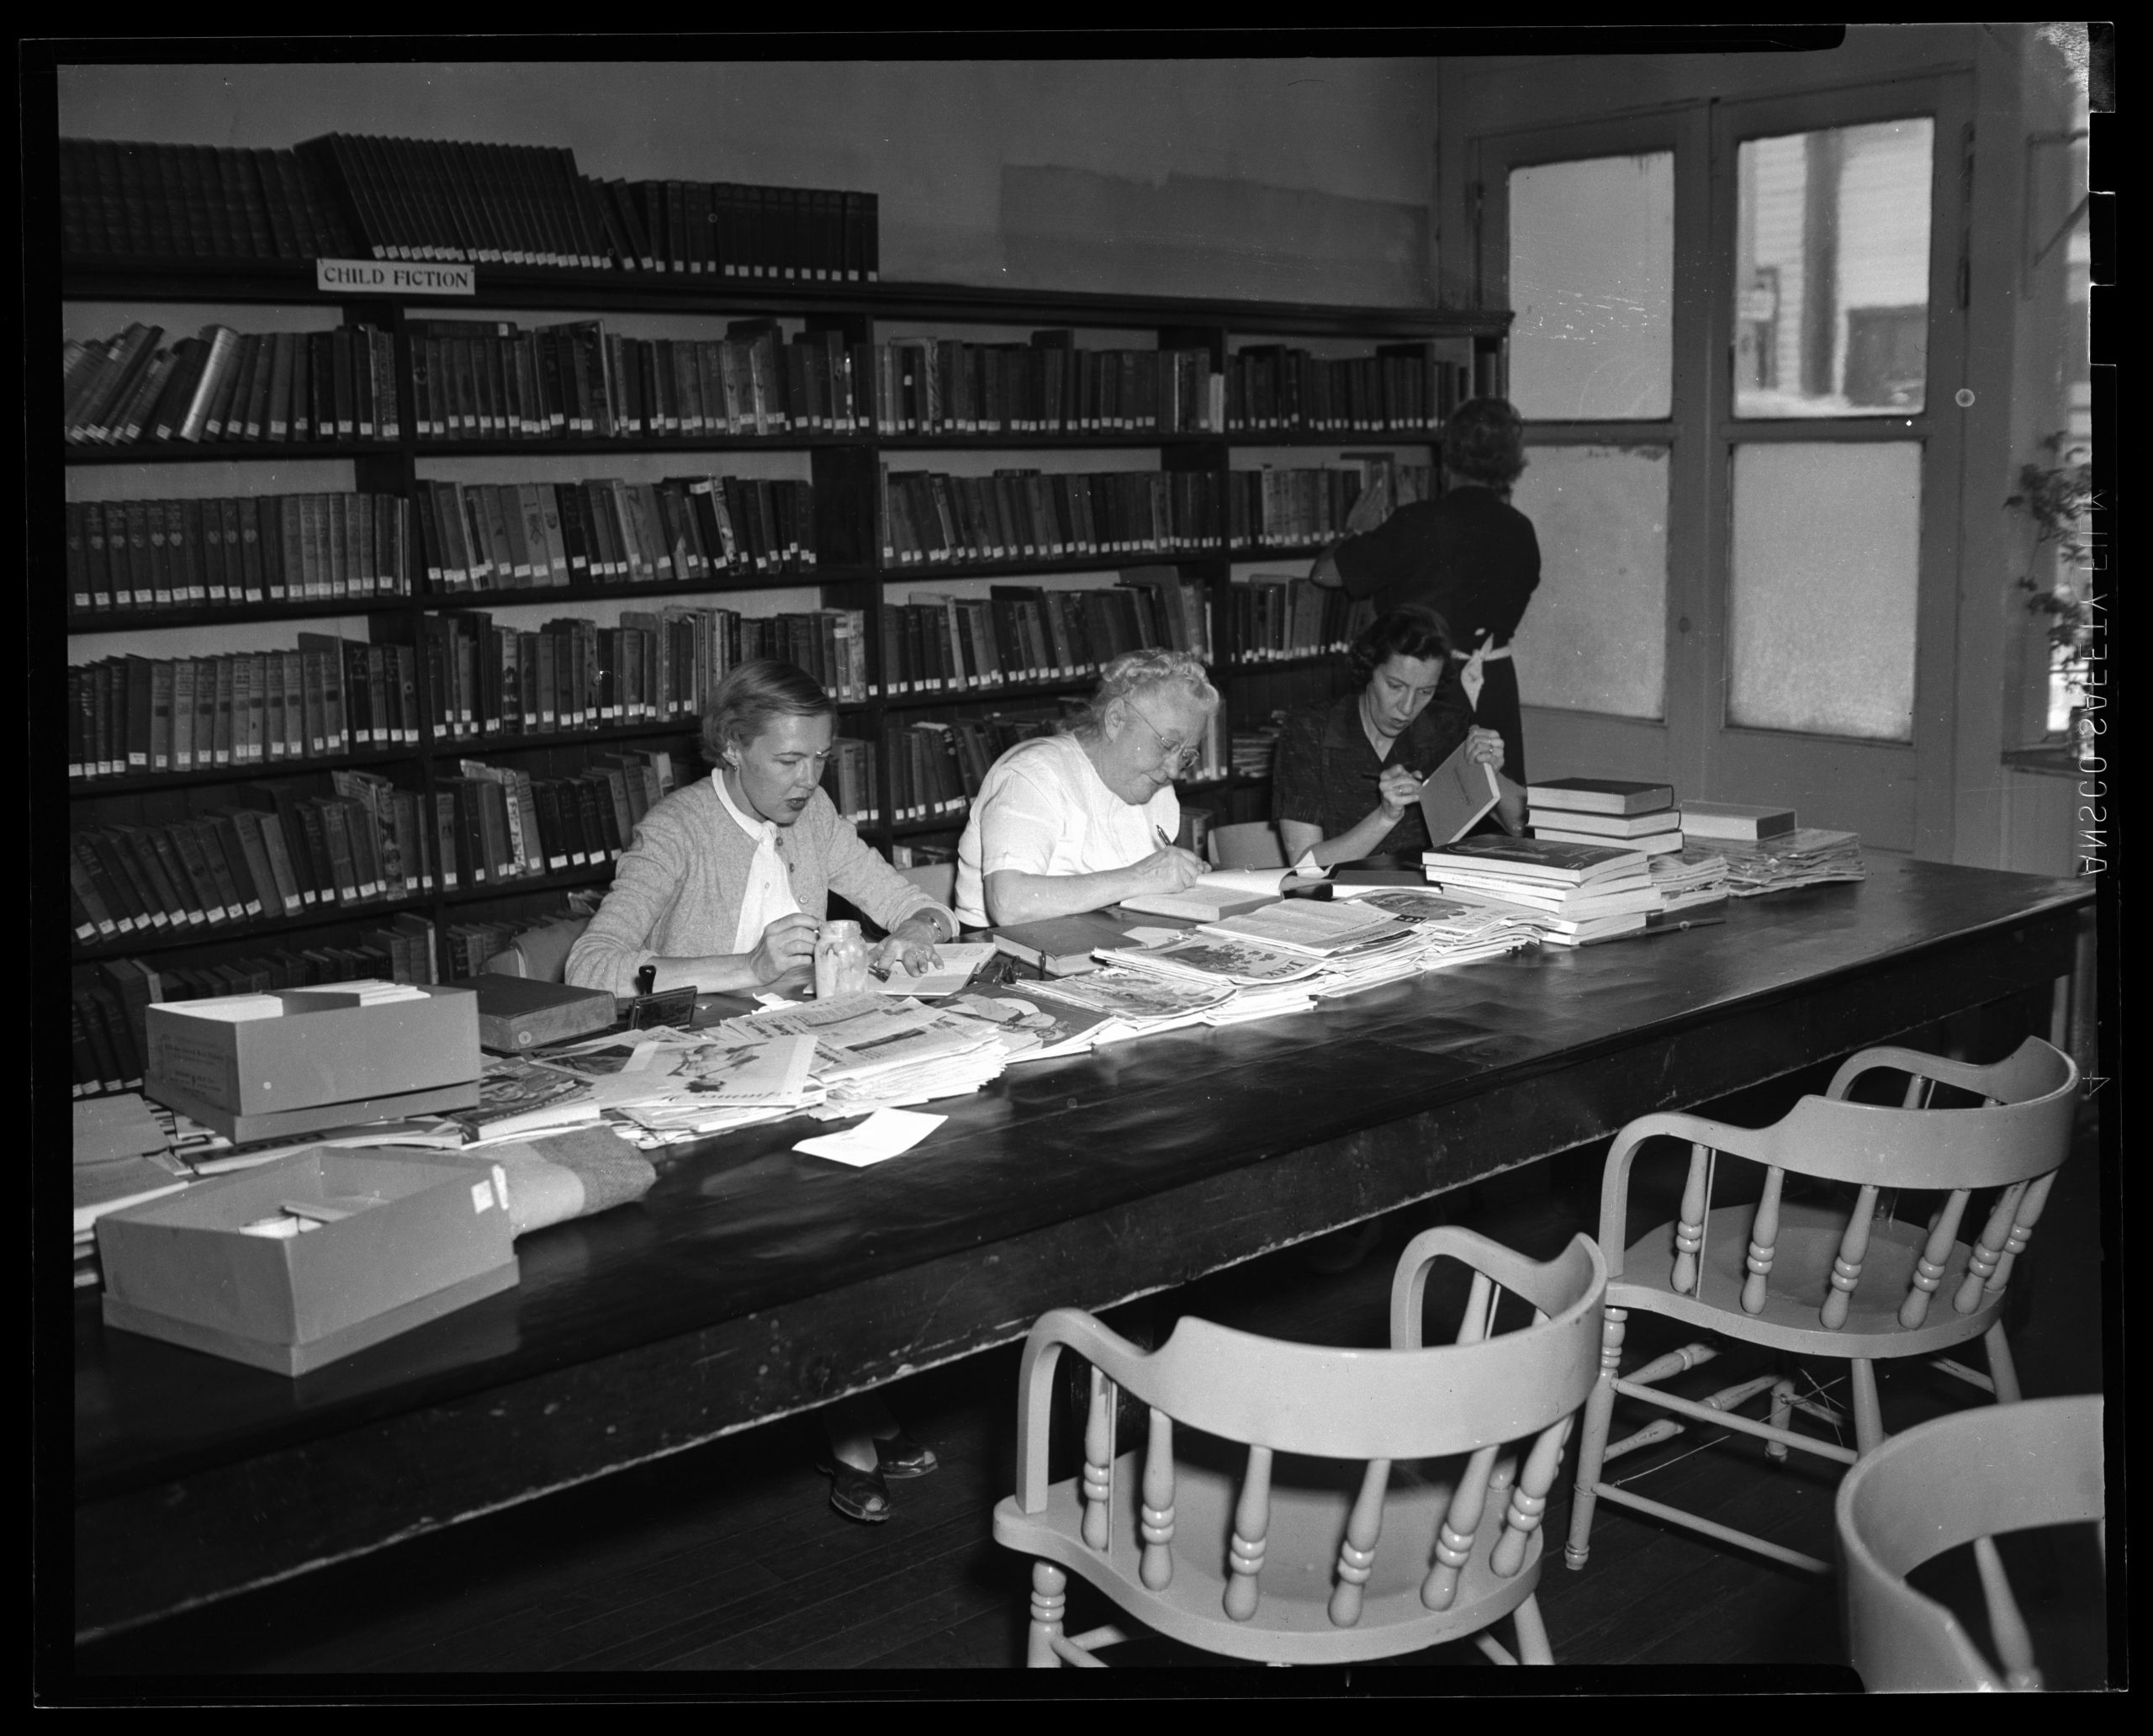 Athenaeum Workers at the Park City Public Library, October 1955 from the Park City Historical Society and Museum Kendall Webb Collection.